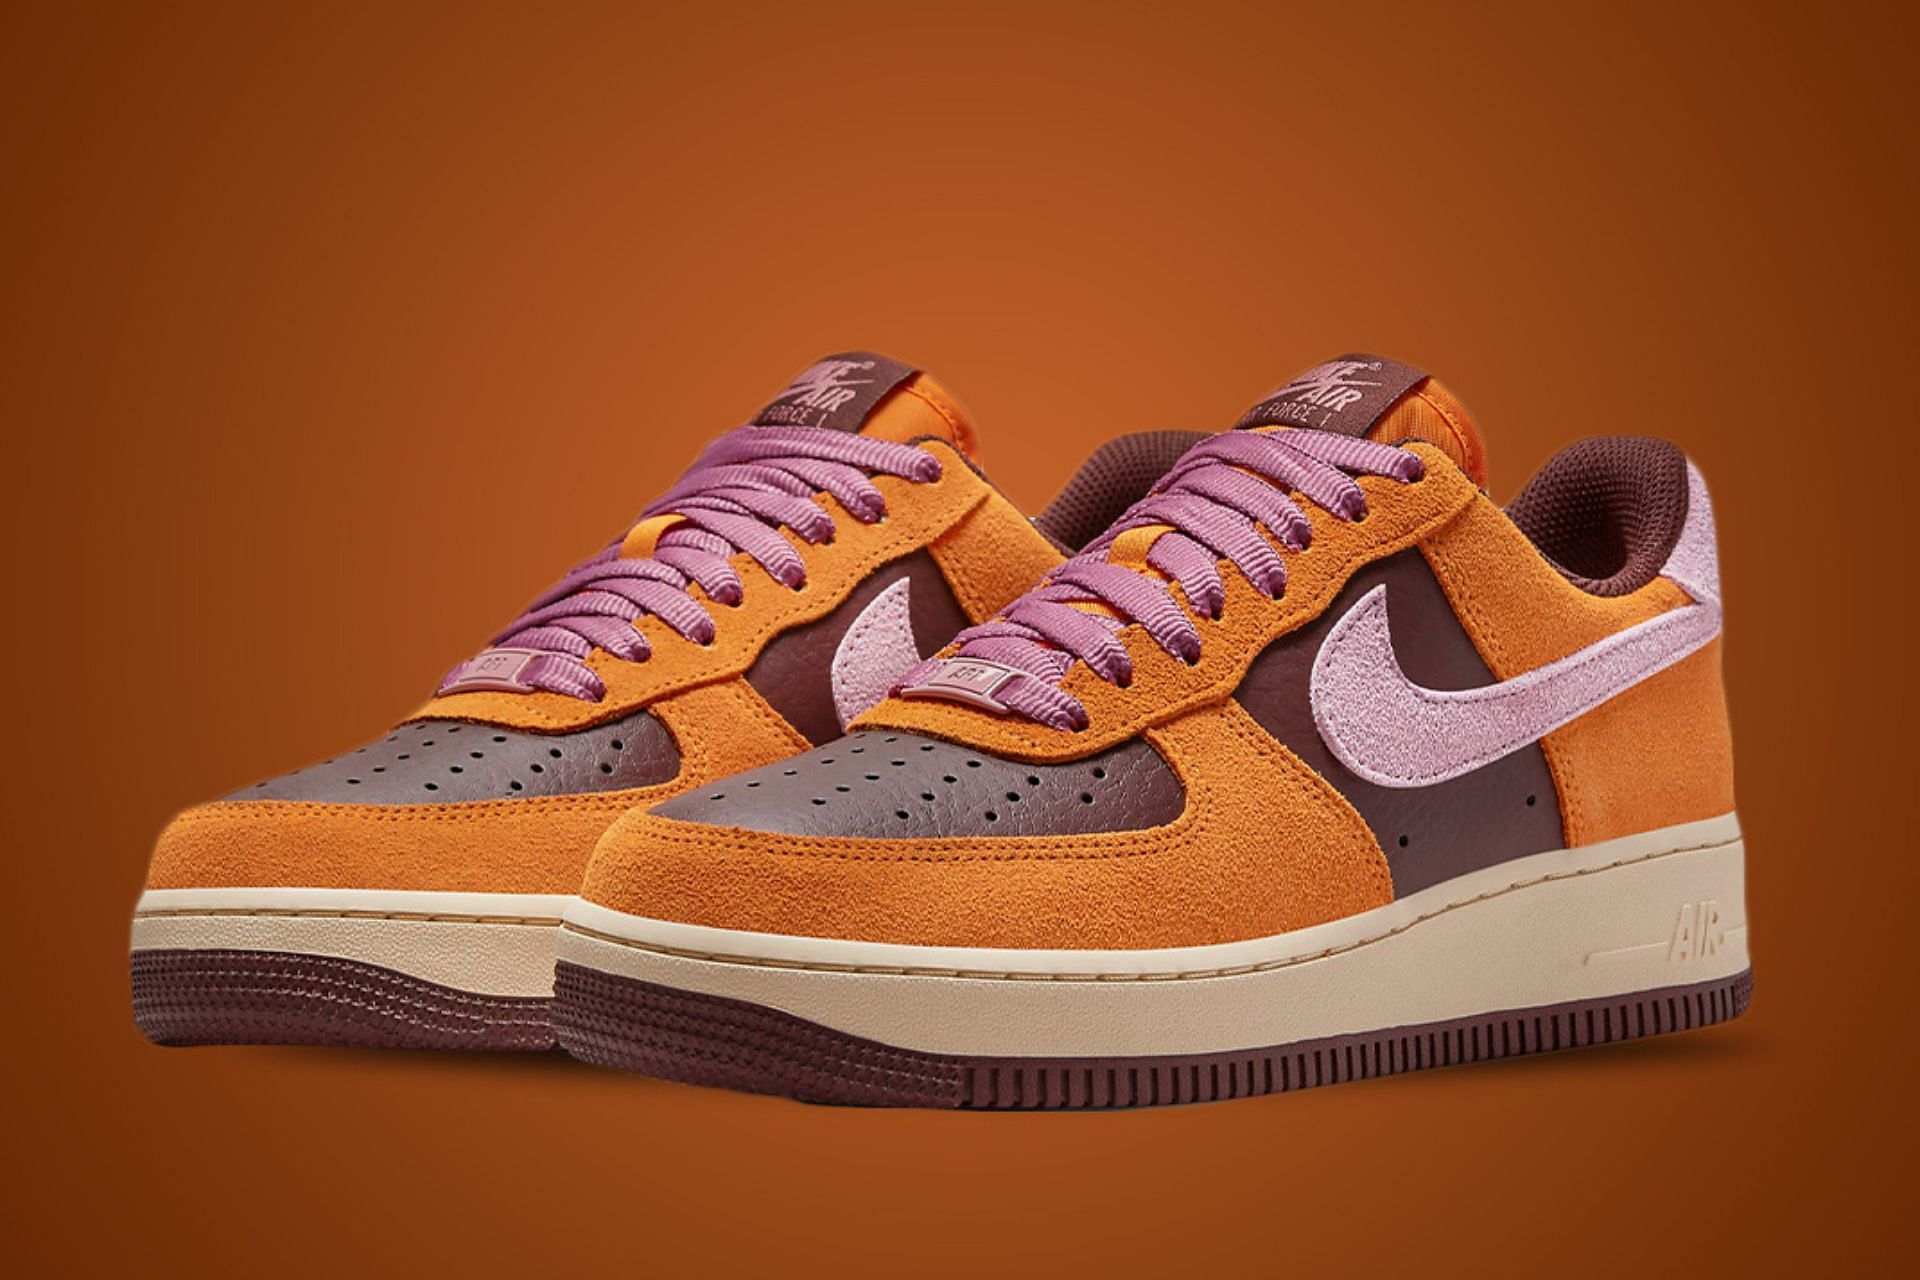 Where to buy Nike Air Force 1 Low Magma Orange Elemental Pink shoes? Price and more details explored 